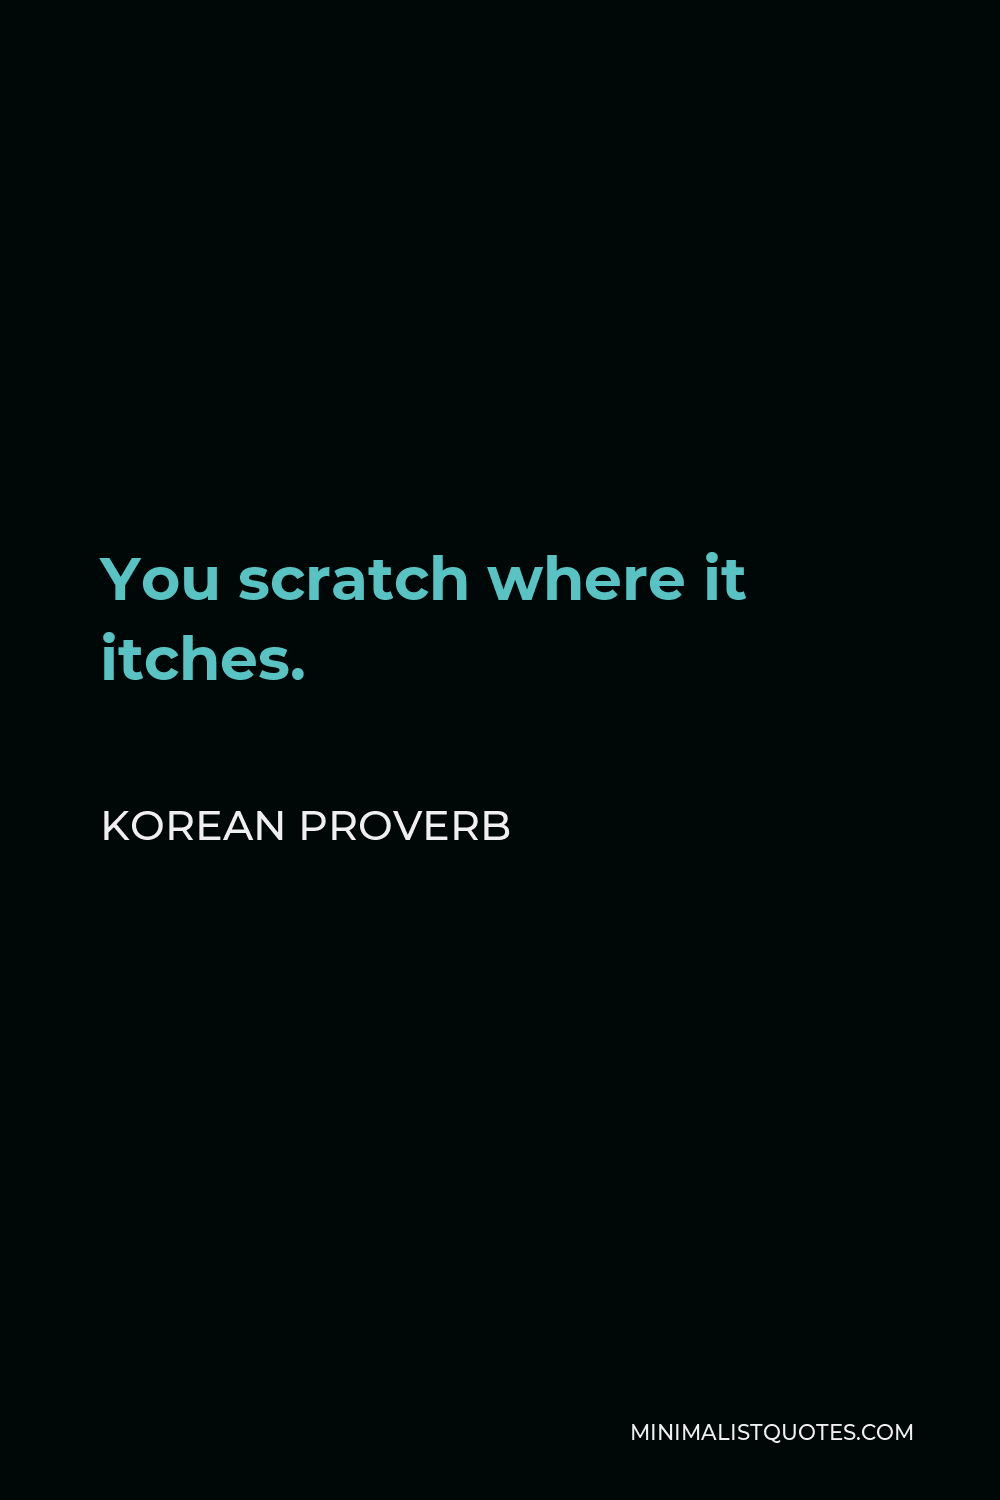 Korean Proverb Quote - You scratch where it itches.